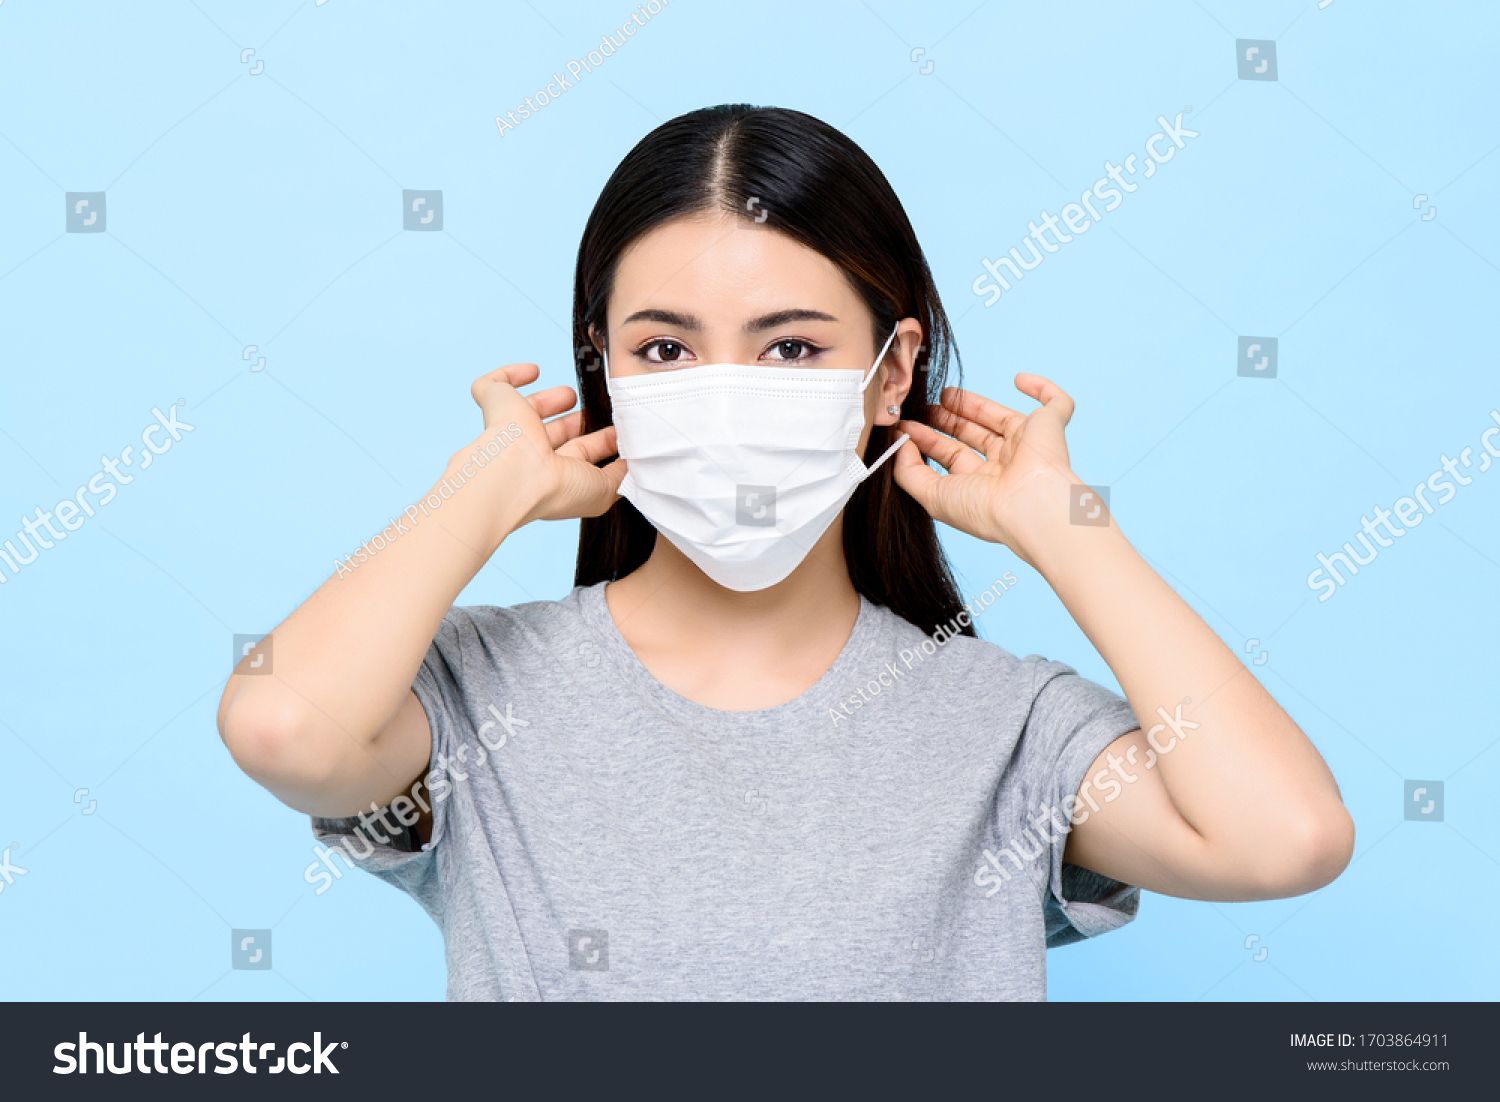 Asian woman wearing medical face mask isolated on light blue background #1703864911